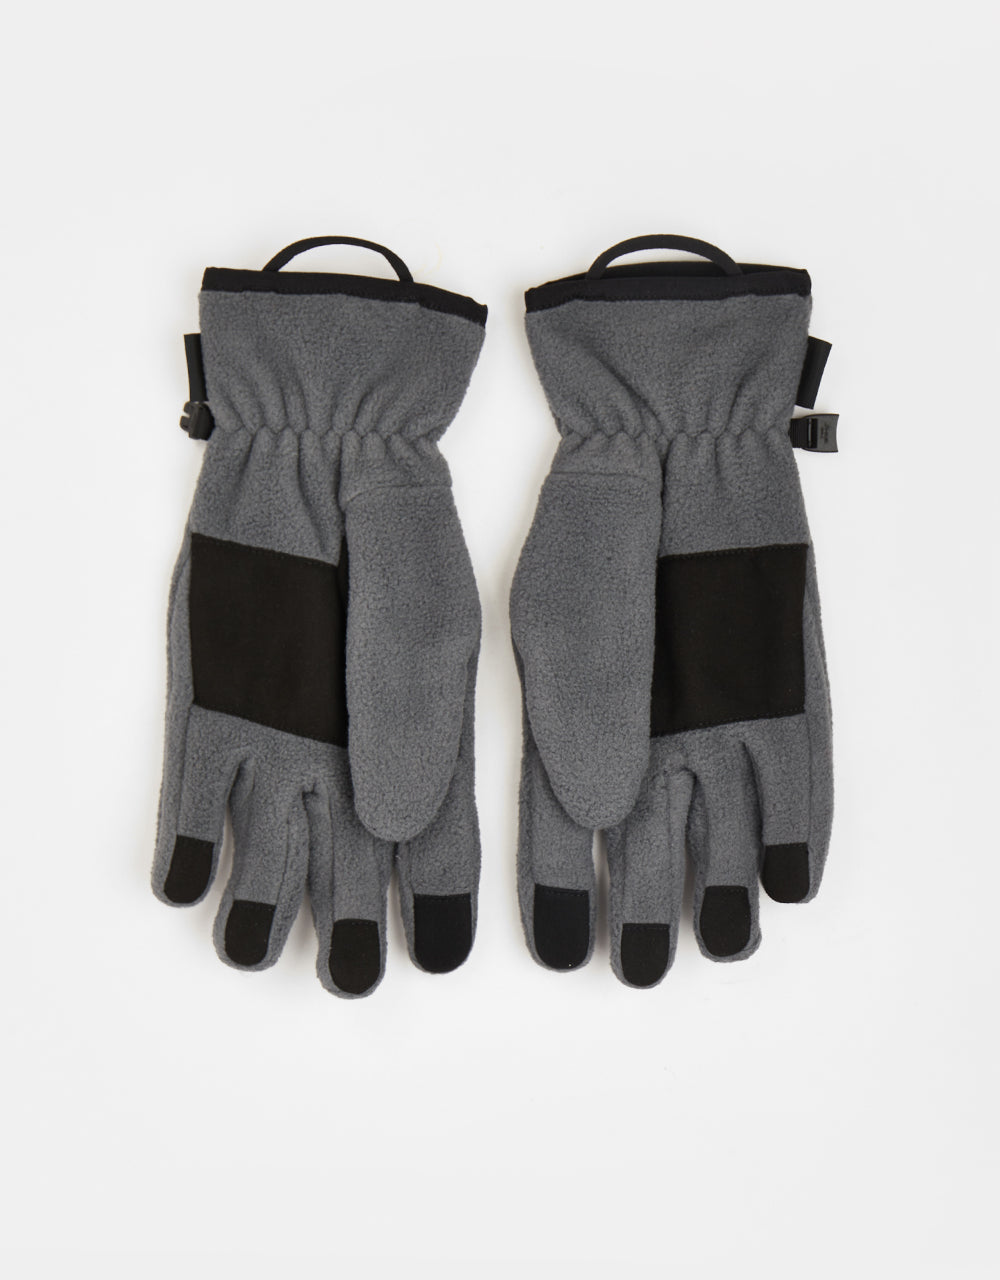 Patagonia Synch Gloves - Forge Grey